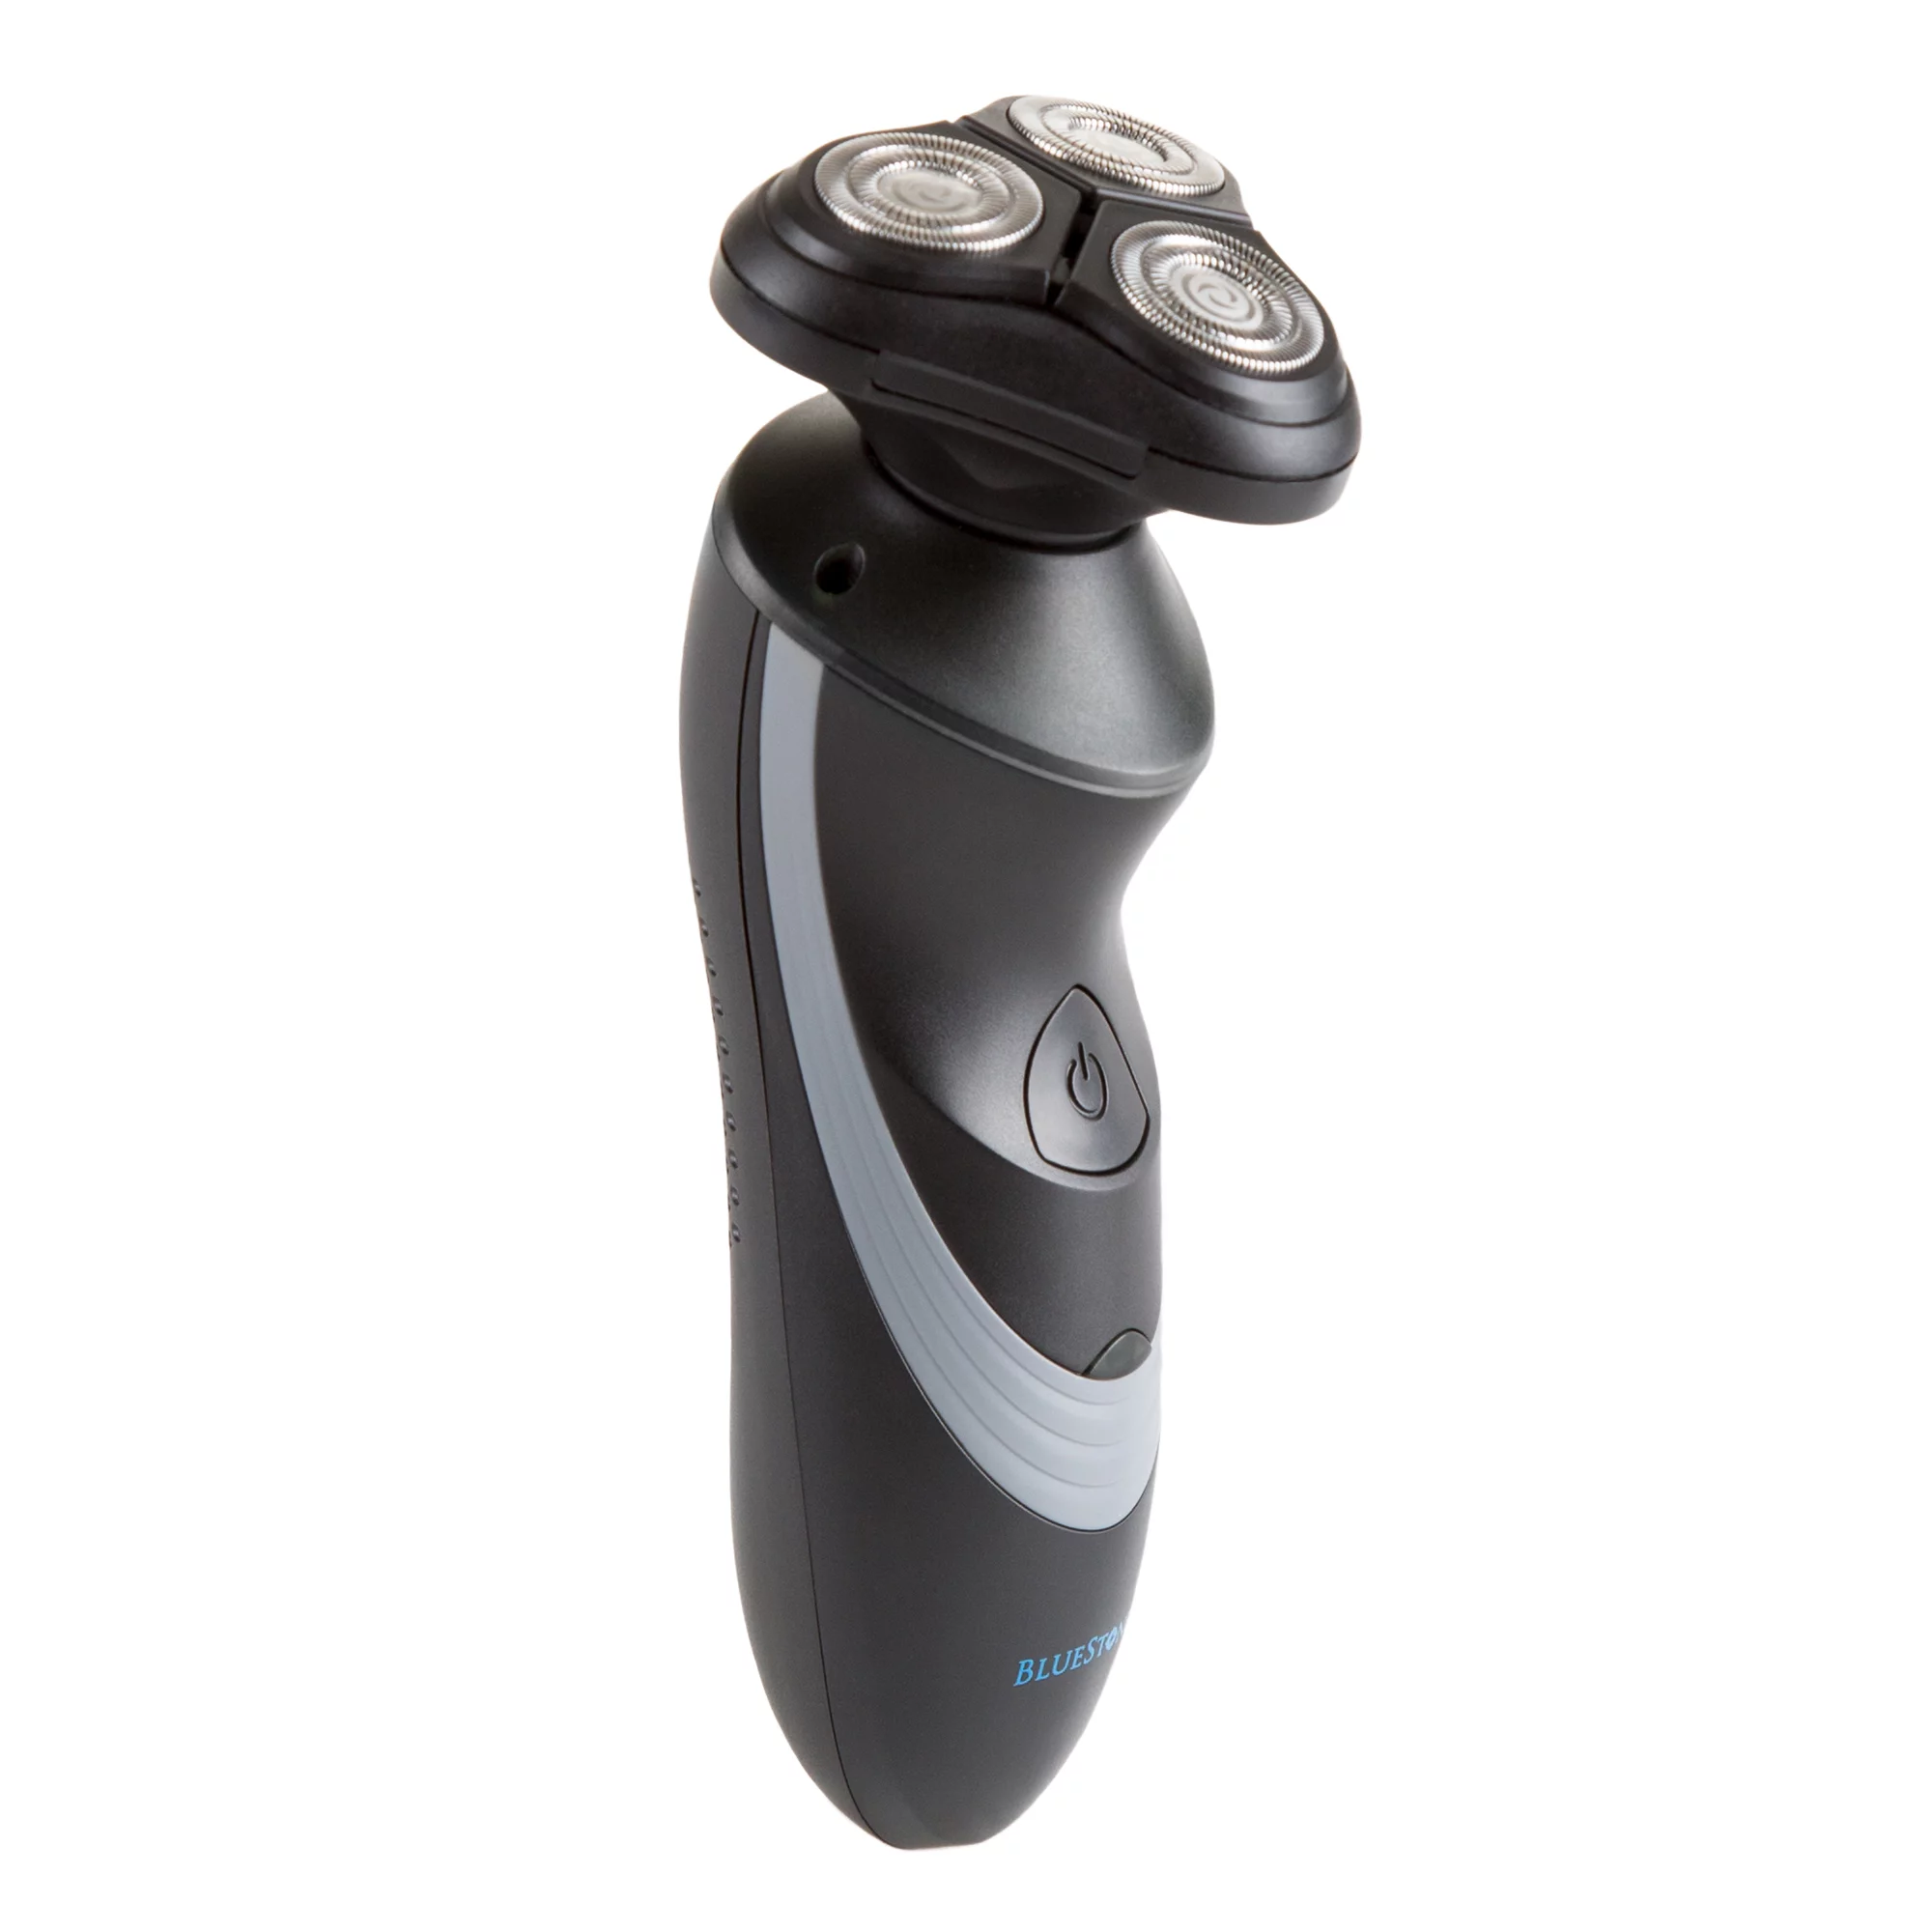 rotary-electric-shavers